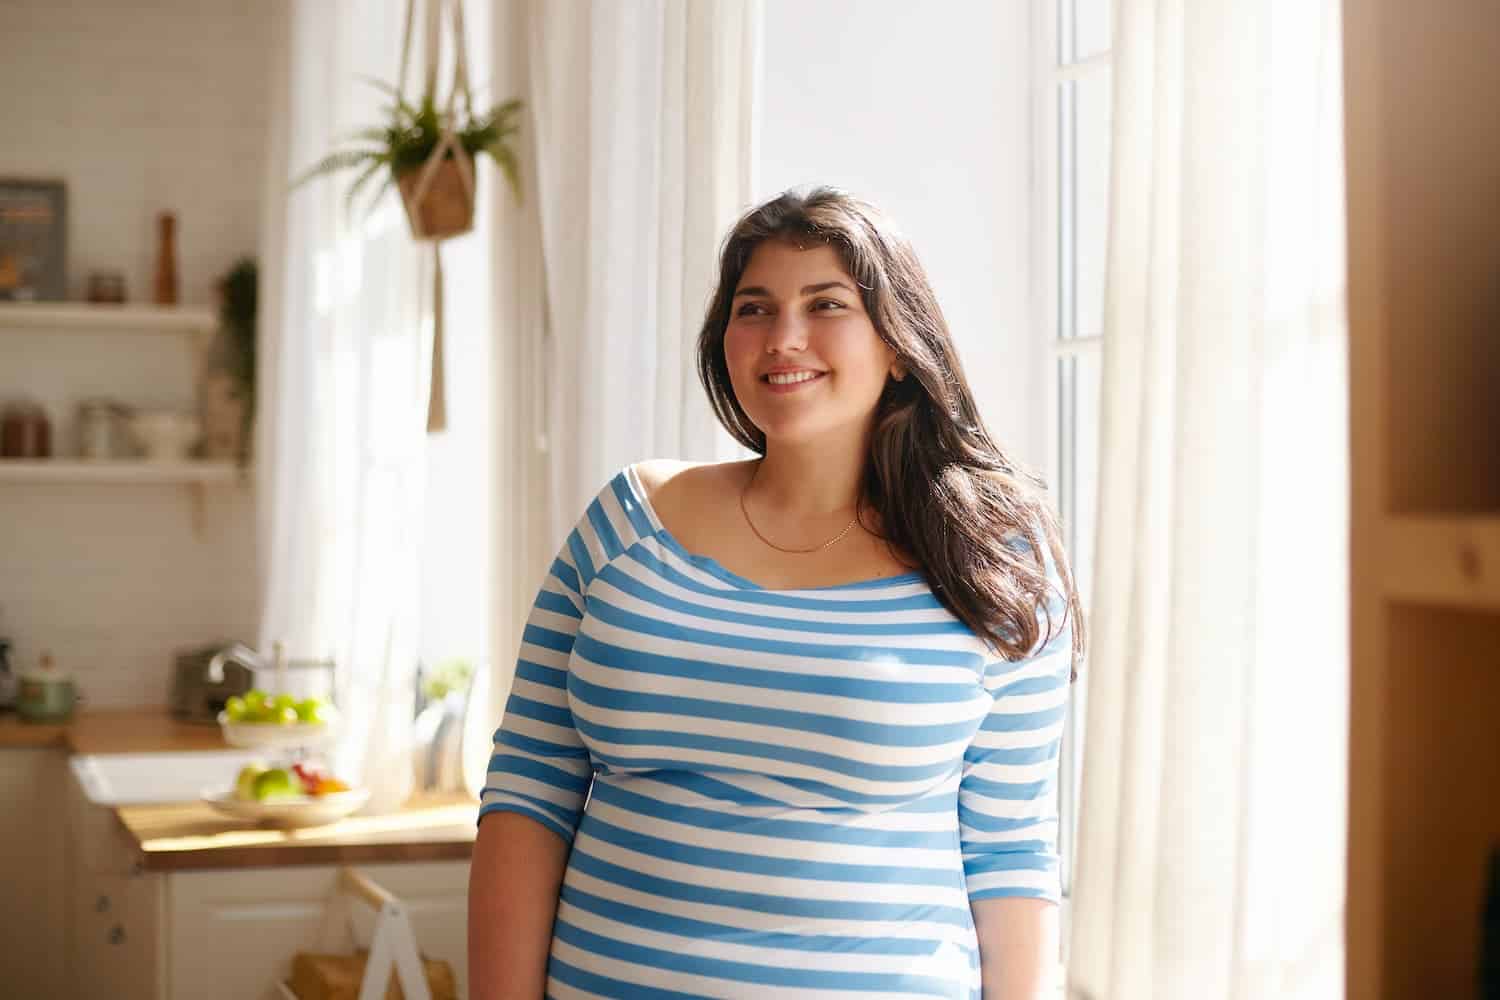 Woman in a blue and white striped dress standing in a kitchen — MedSurg Weight Loss in Brisbane, QLD